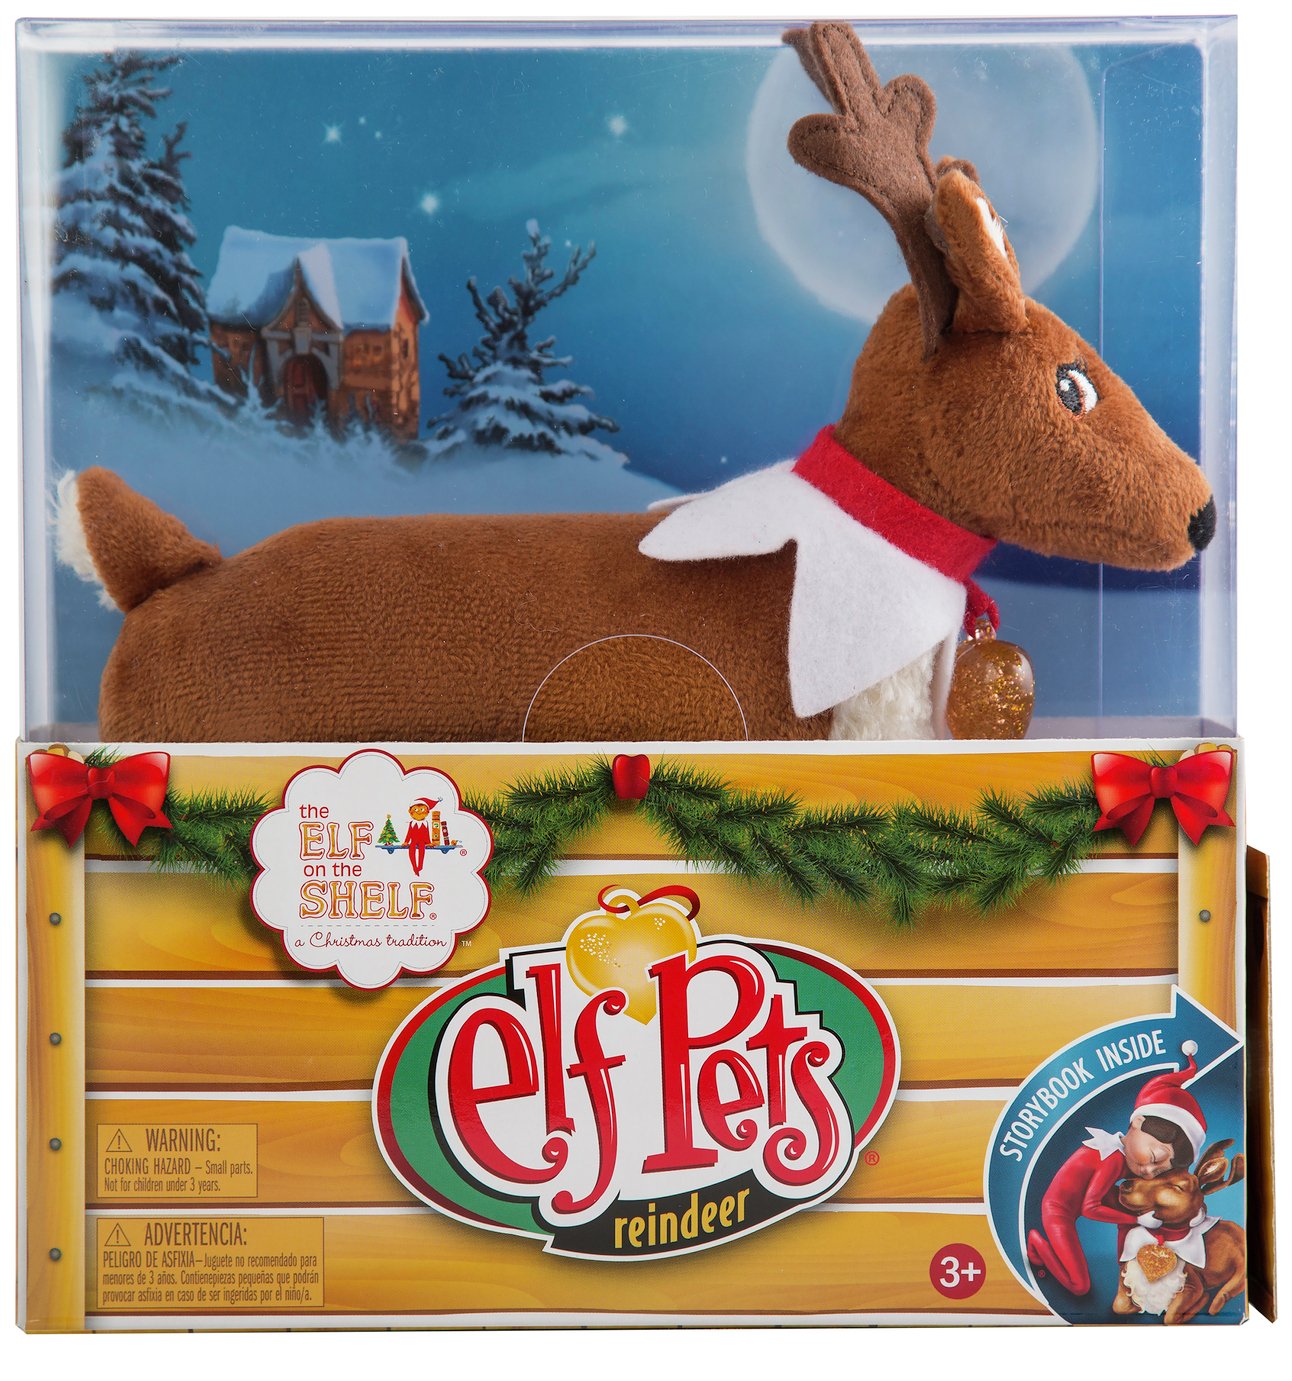 The Elf on The Shelf Pets Reindeer Tradition